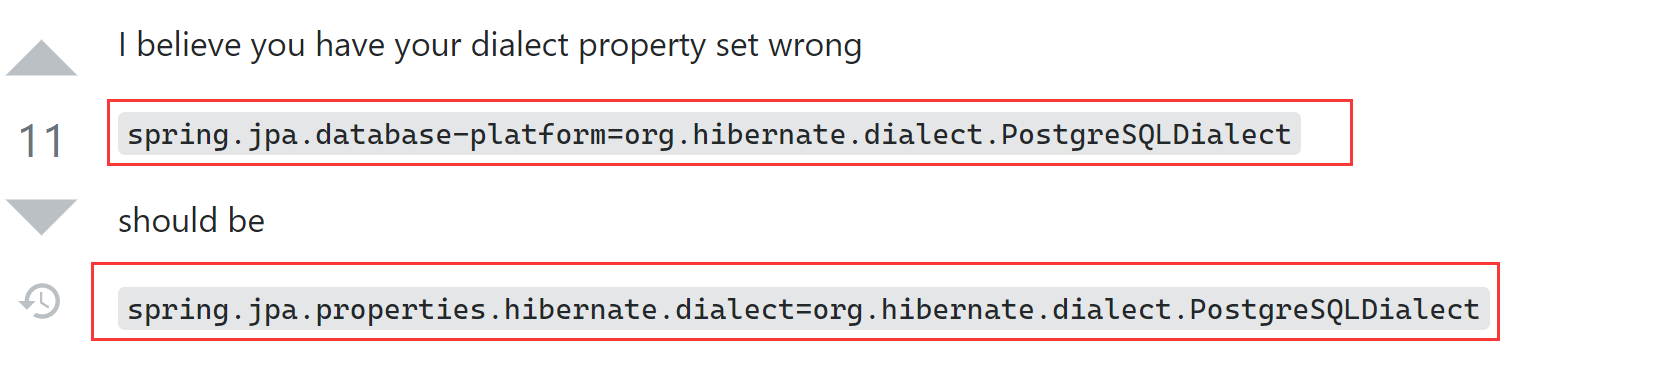 Access to DialectResolutionInfo cannot be null when ‘hibernate.dialect‘ not set。